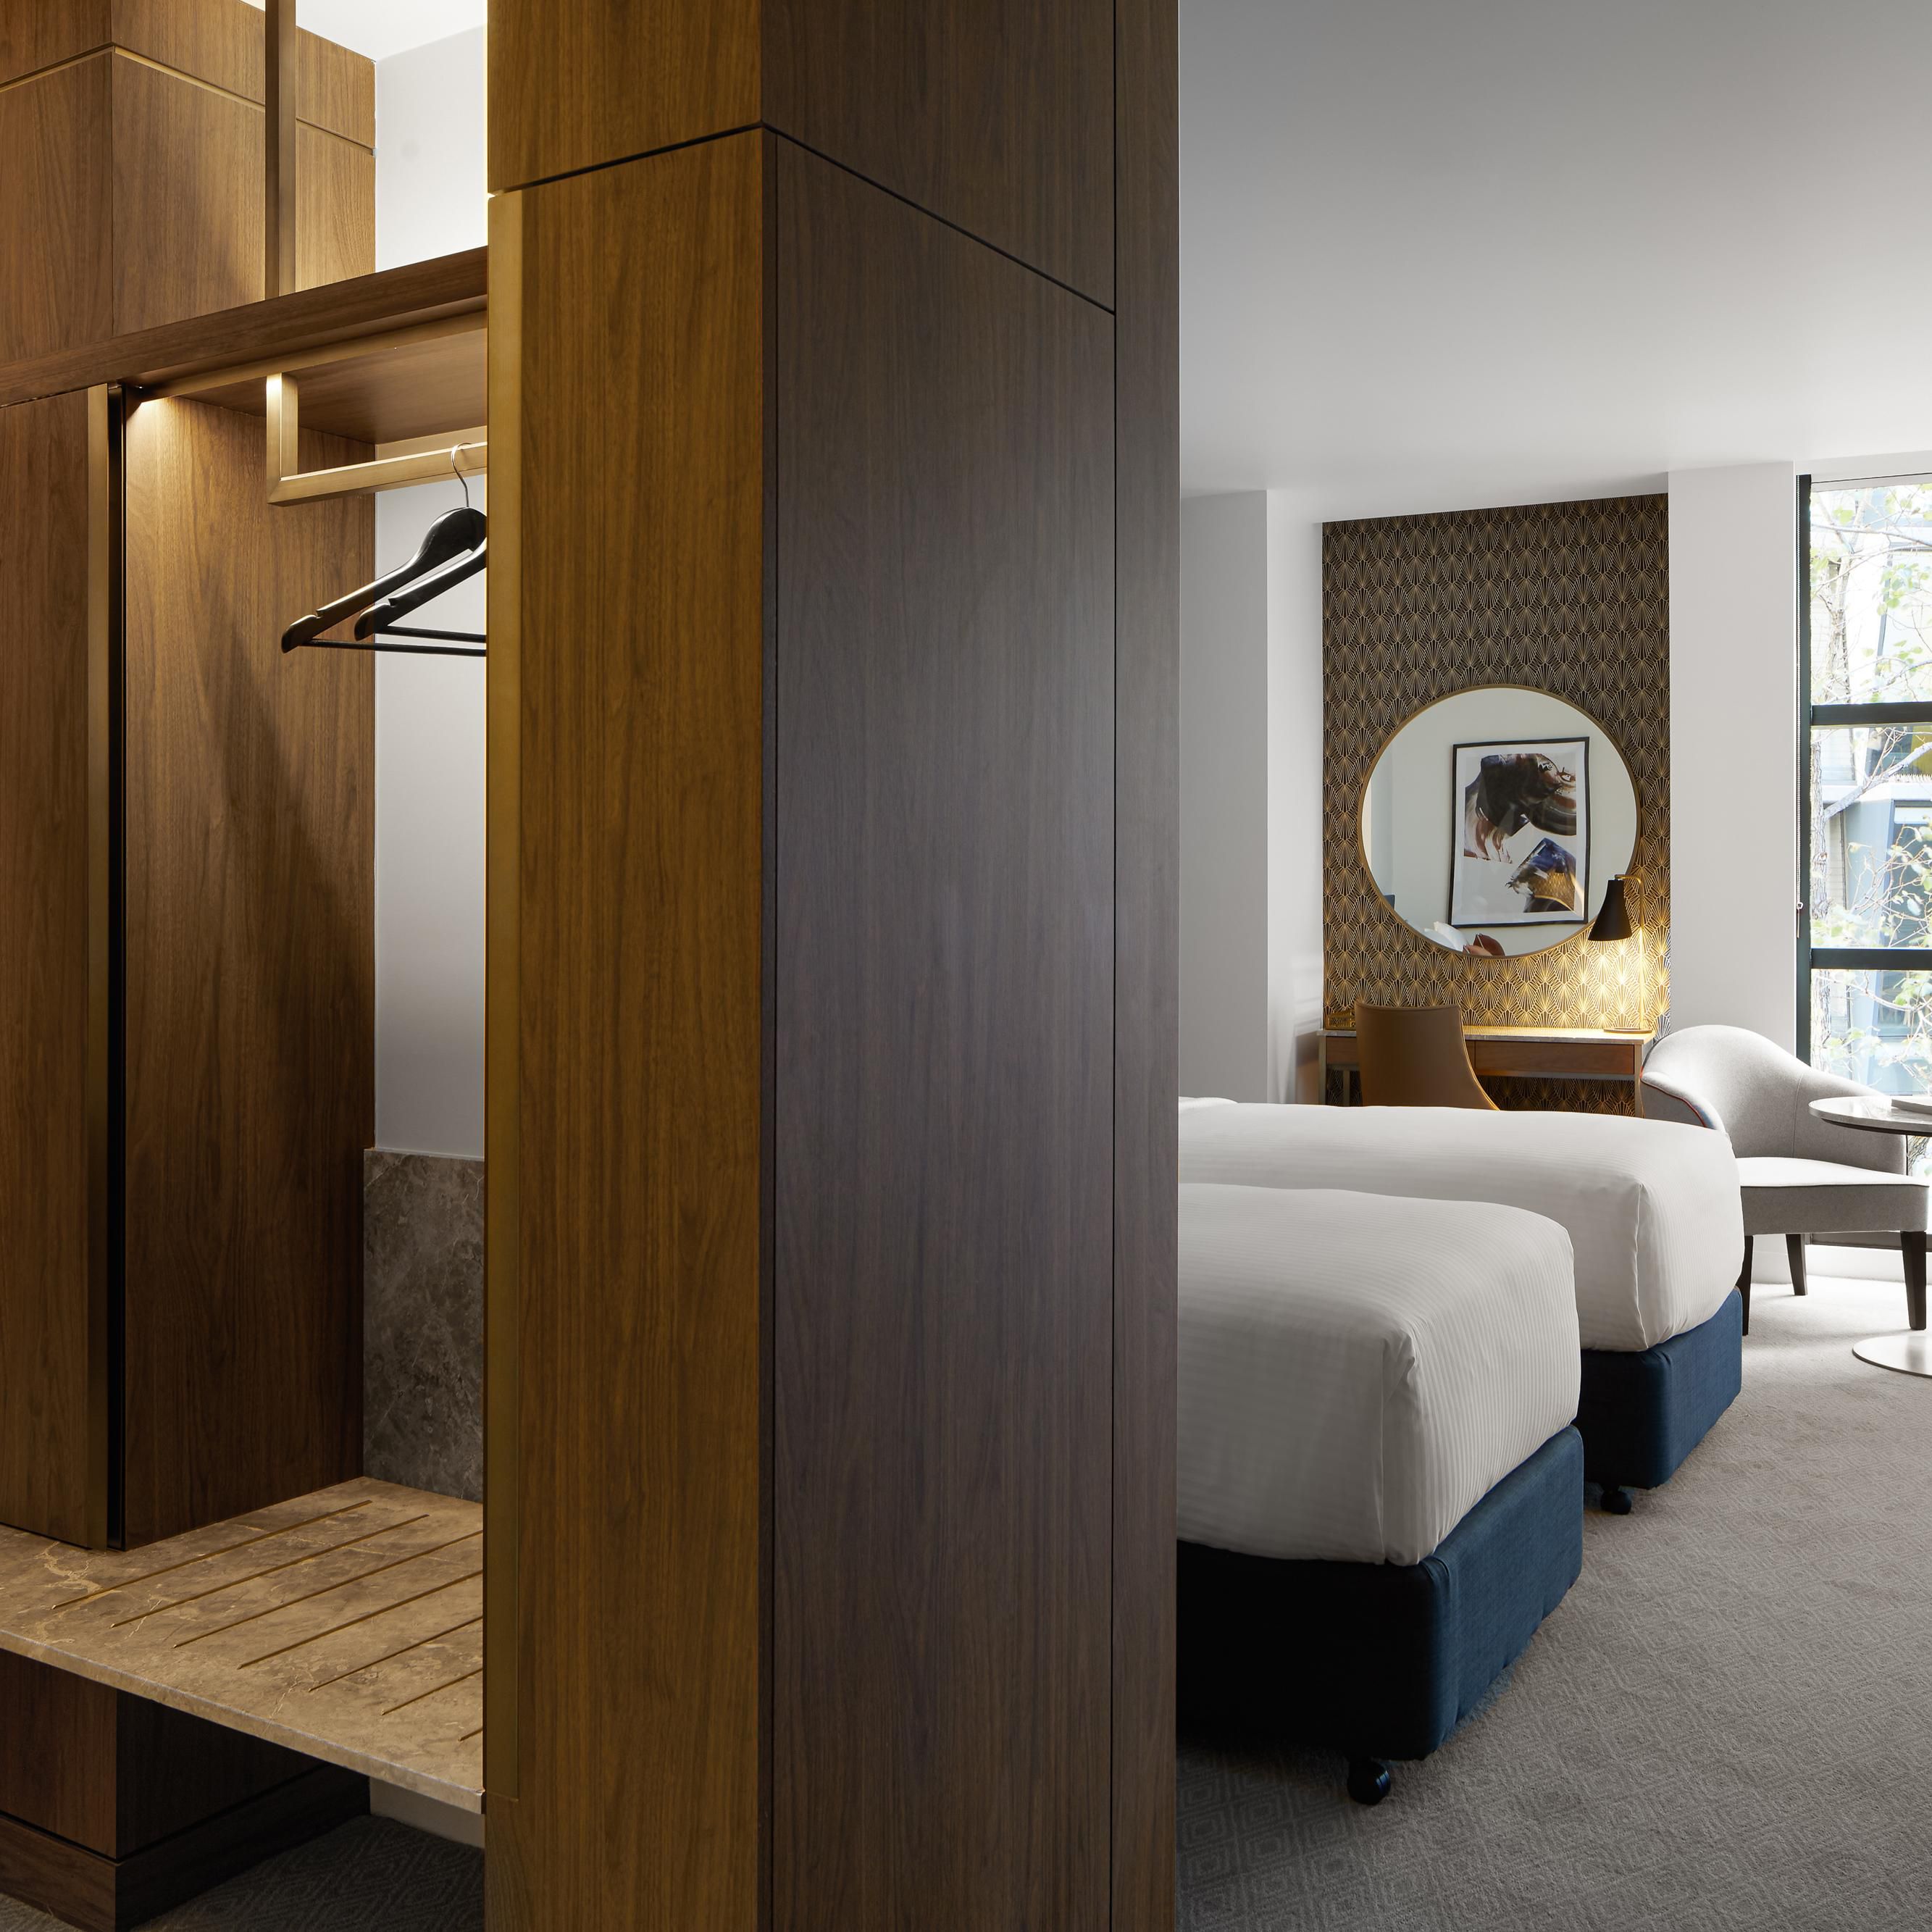 Premium rooms feature zones to unwind and ample wardrobe space